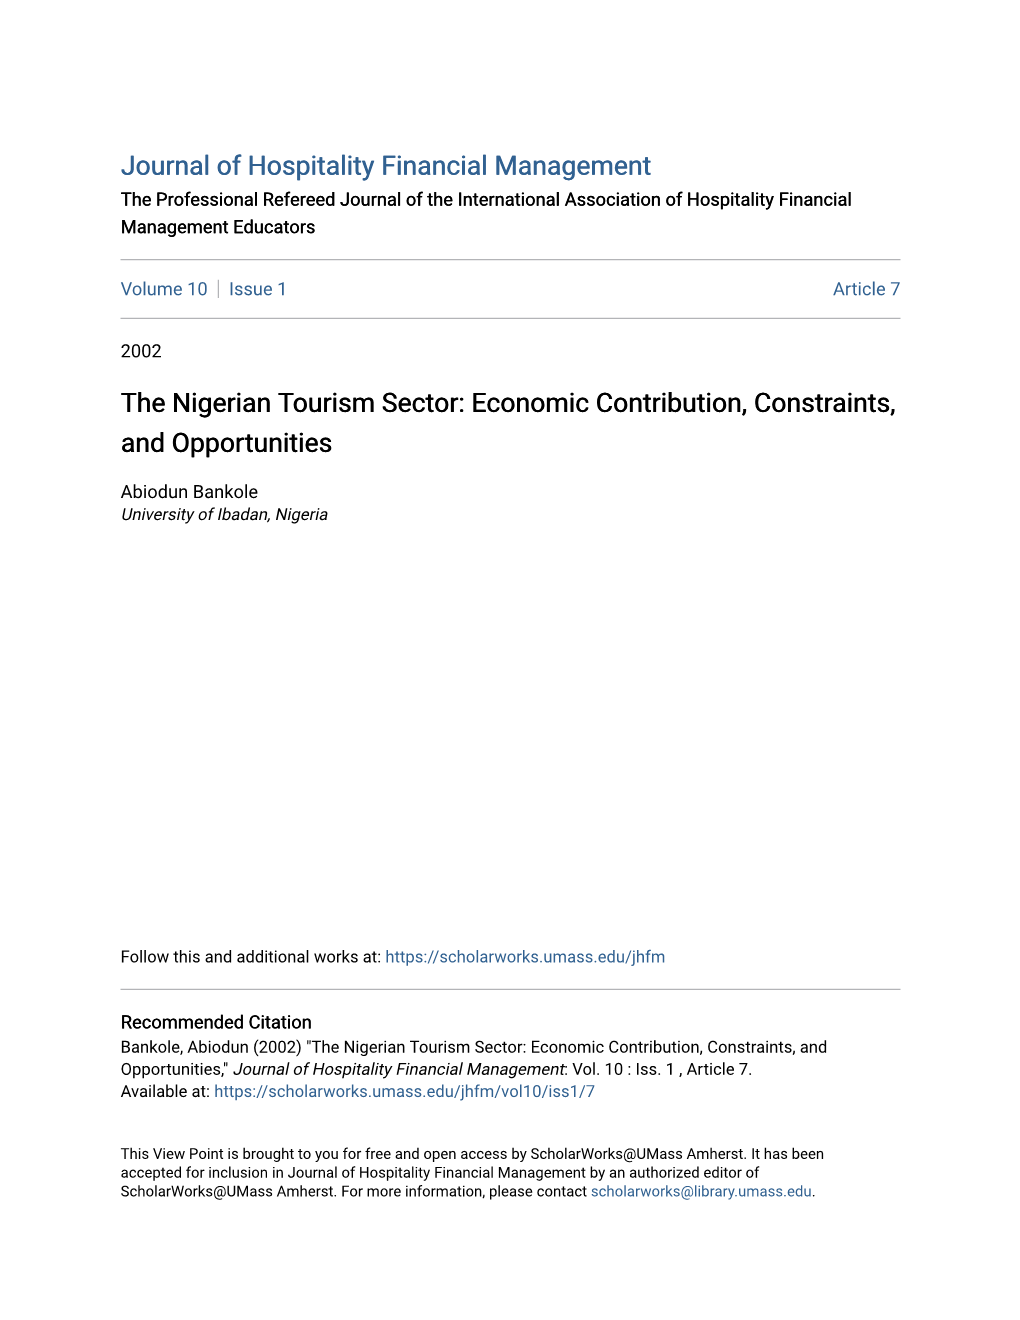 The Nigerian Tourism Sector: Economic Contribution, Constraints, and Opportunities